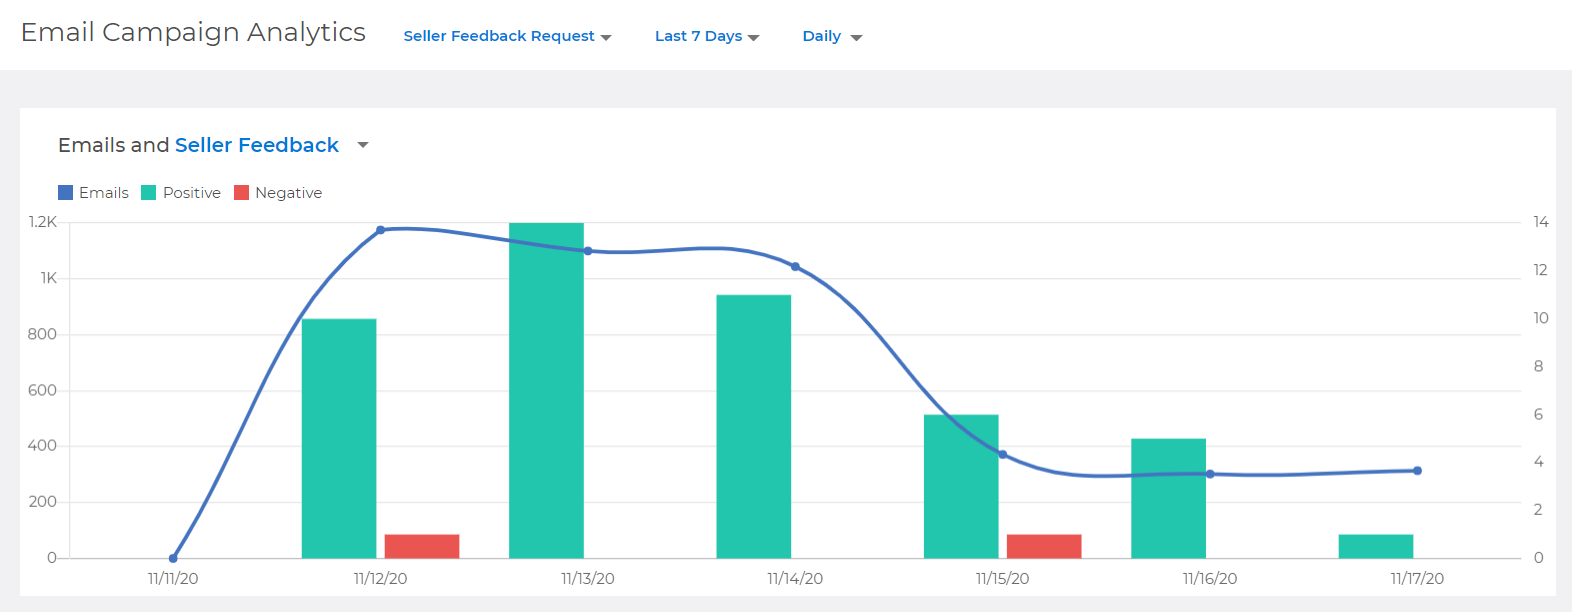 Emails and seller feedback graph view in FeedbackFive